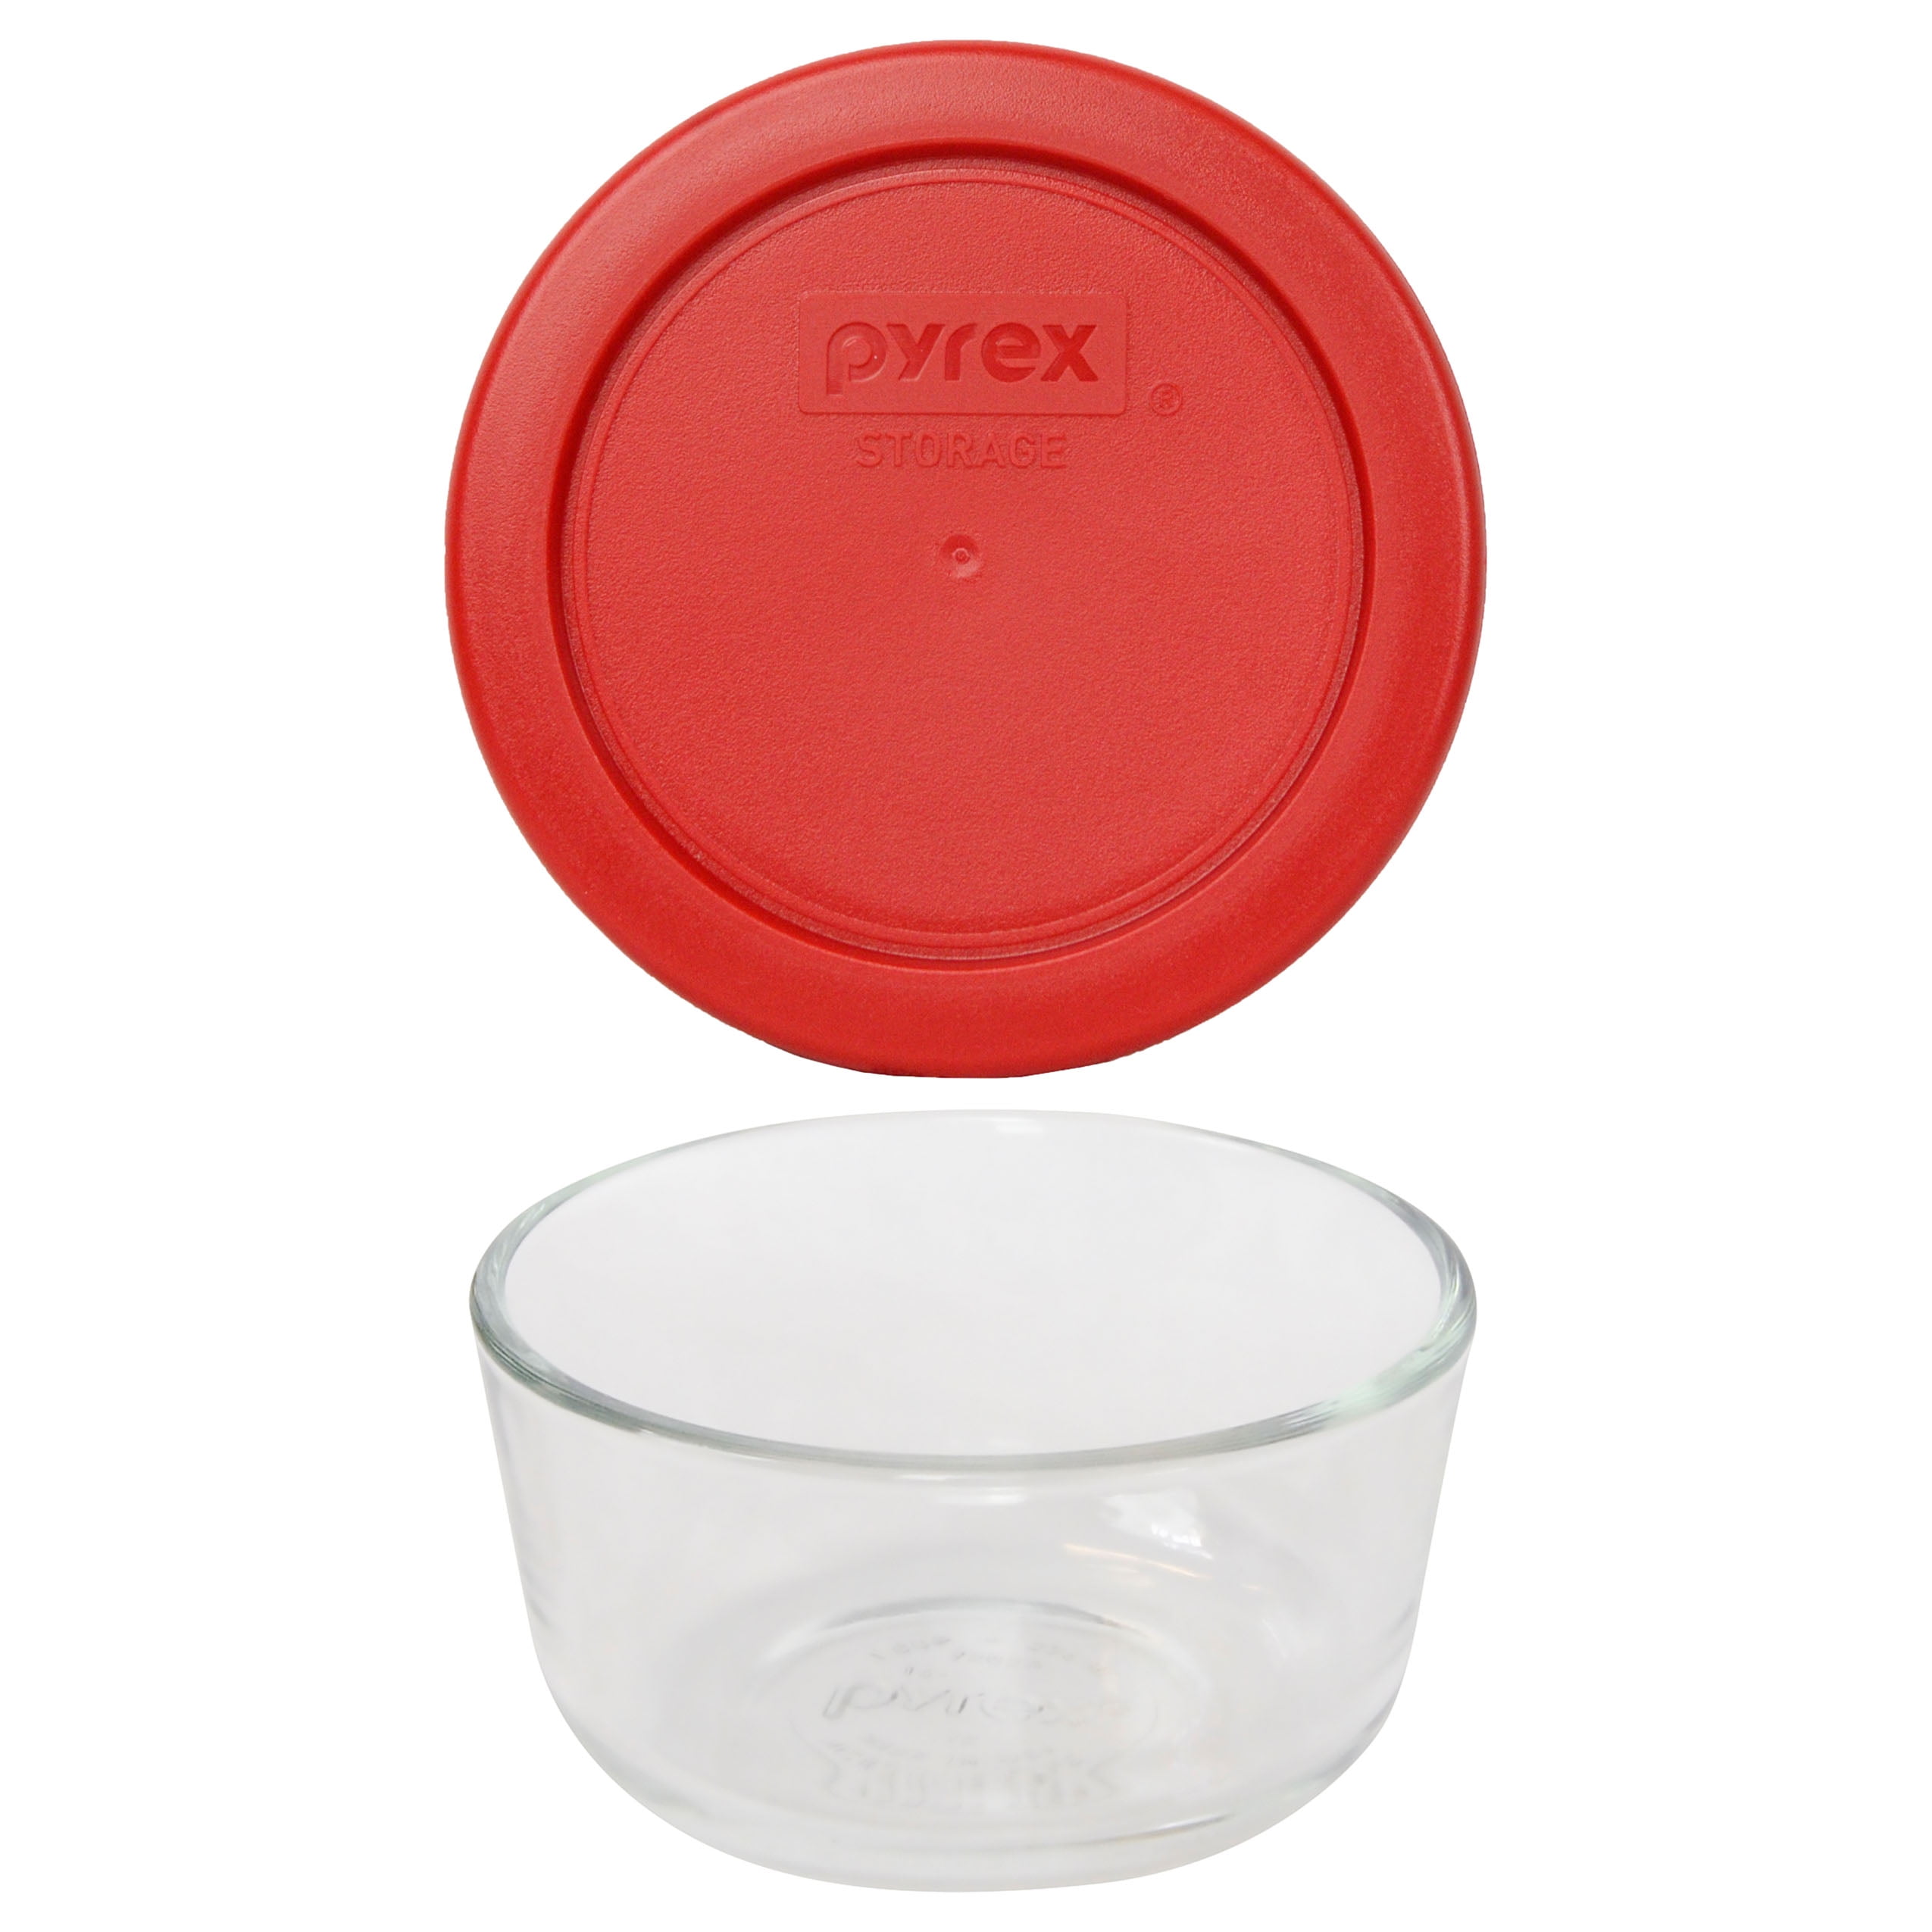 Pyrex Round Storage Containers with Lids - Red, 3 pk - Kroger